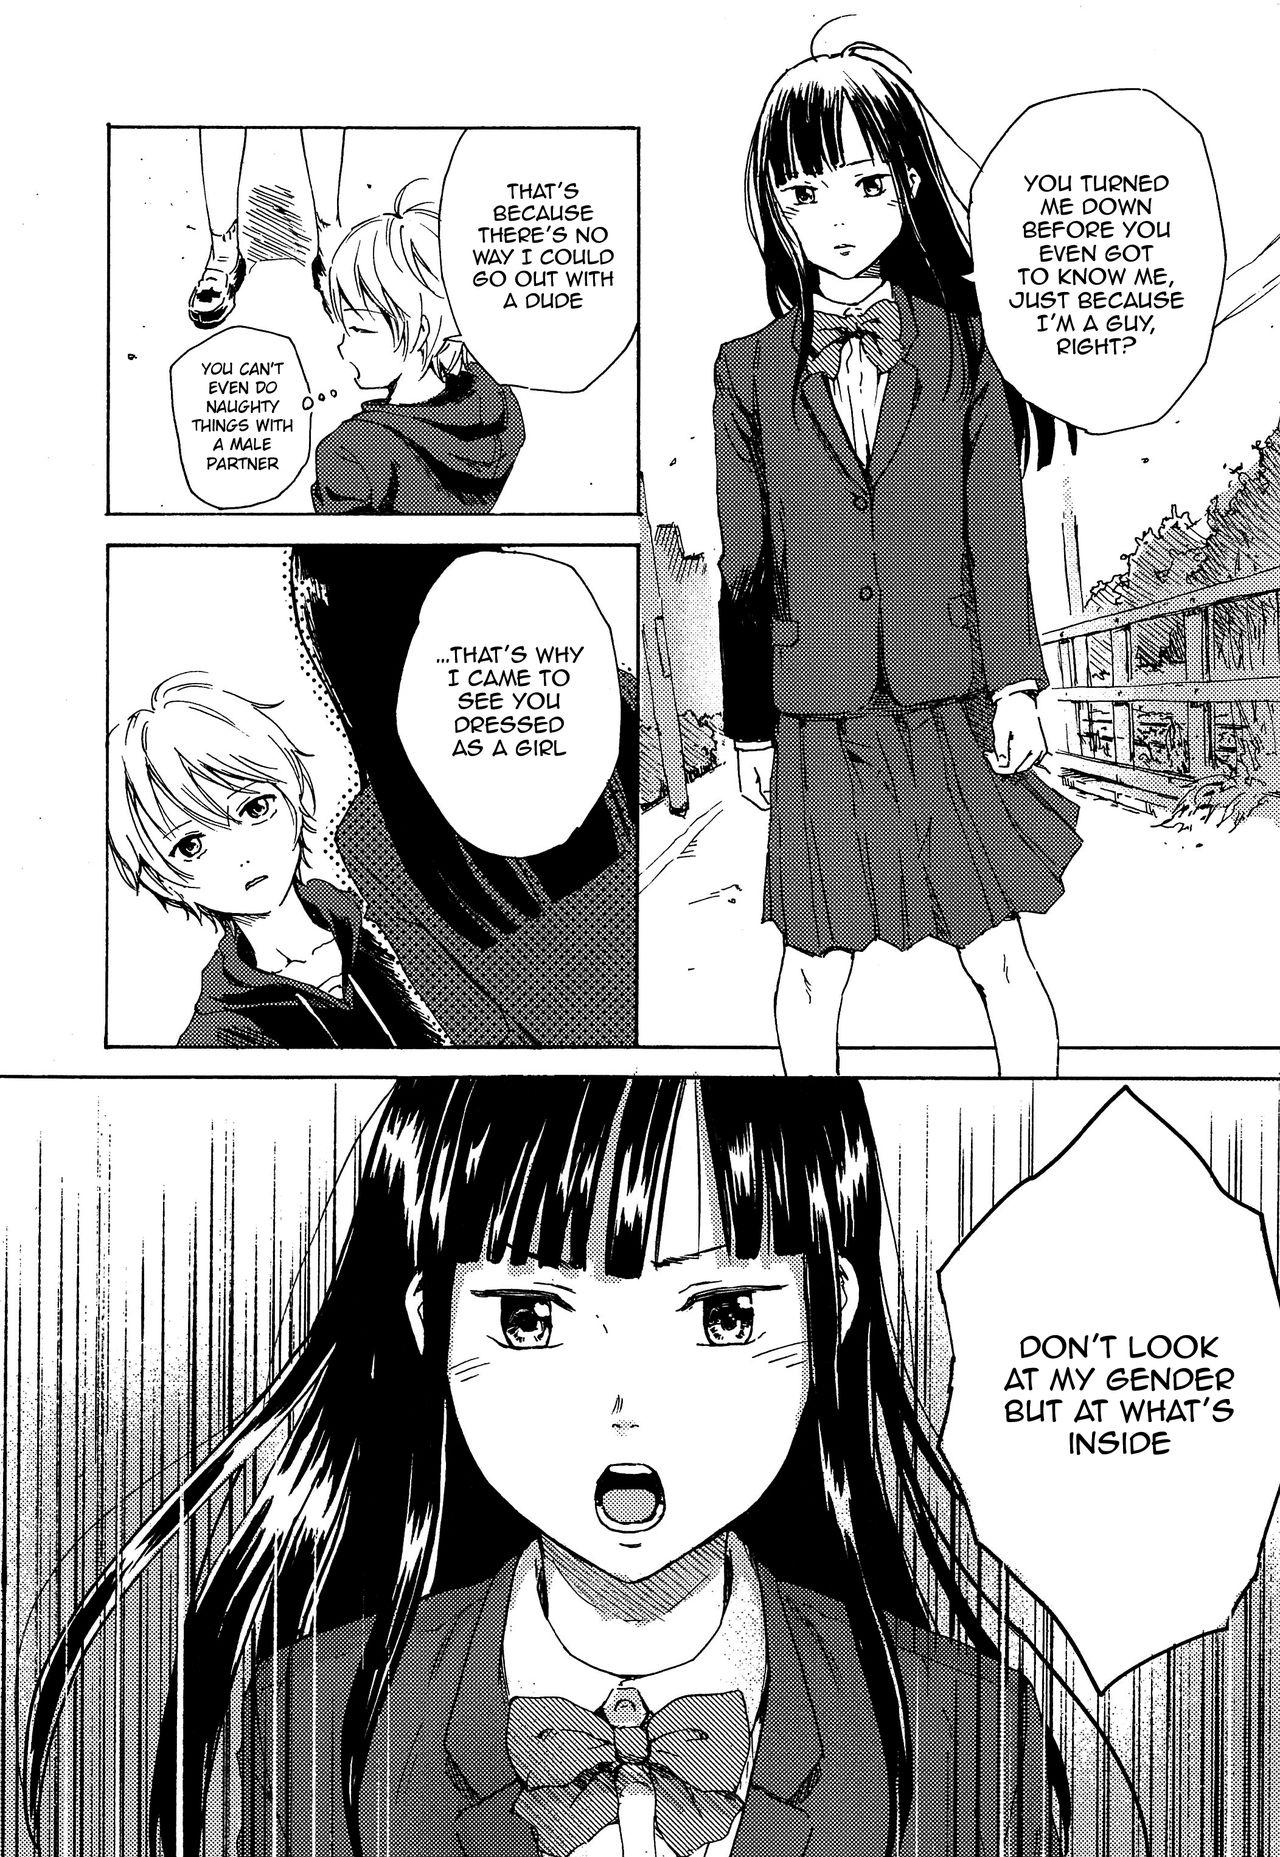 Secret Skirt in the Kataomoi | Skirt in the Unrequited Love - Original Reverse Cowgirl - Page 11